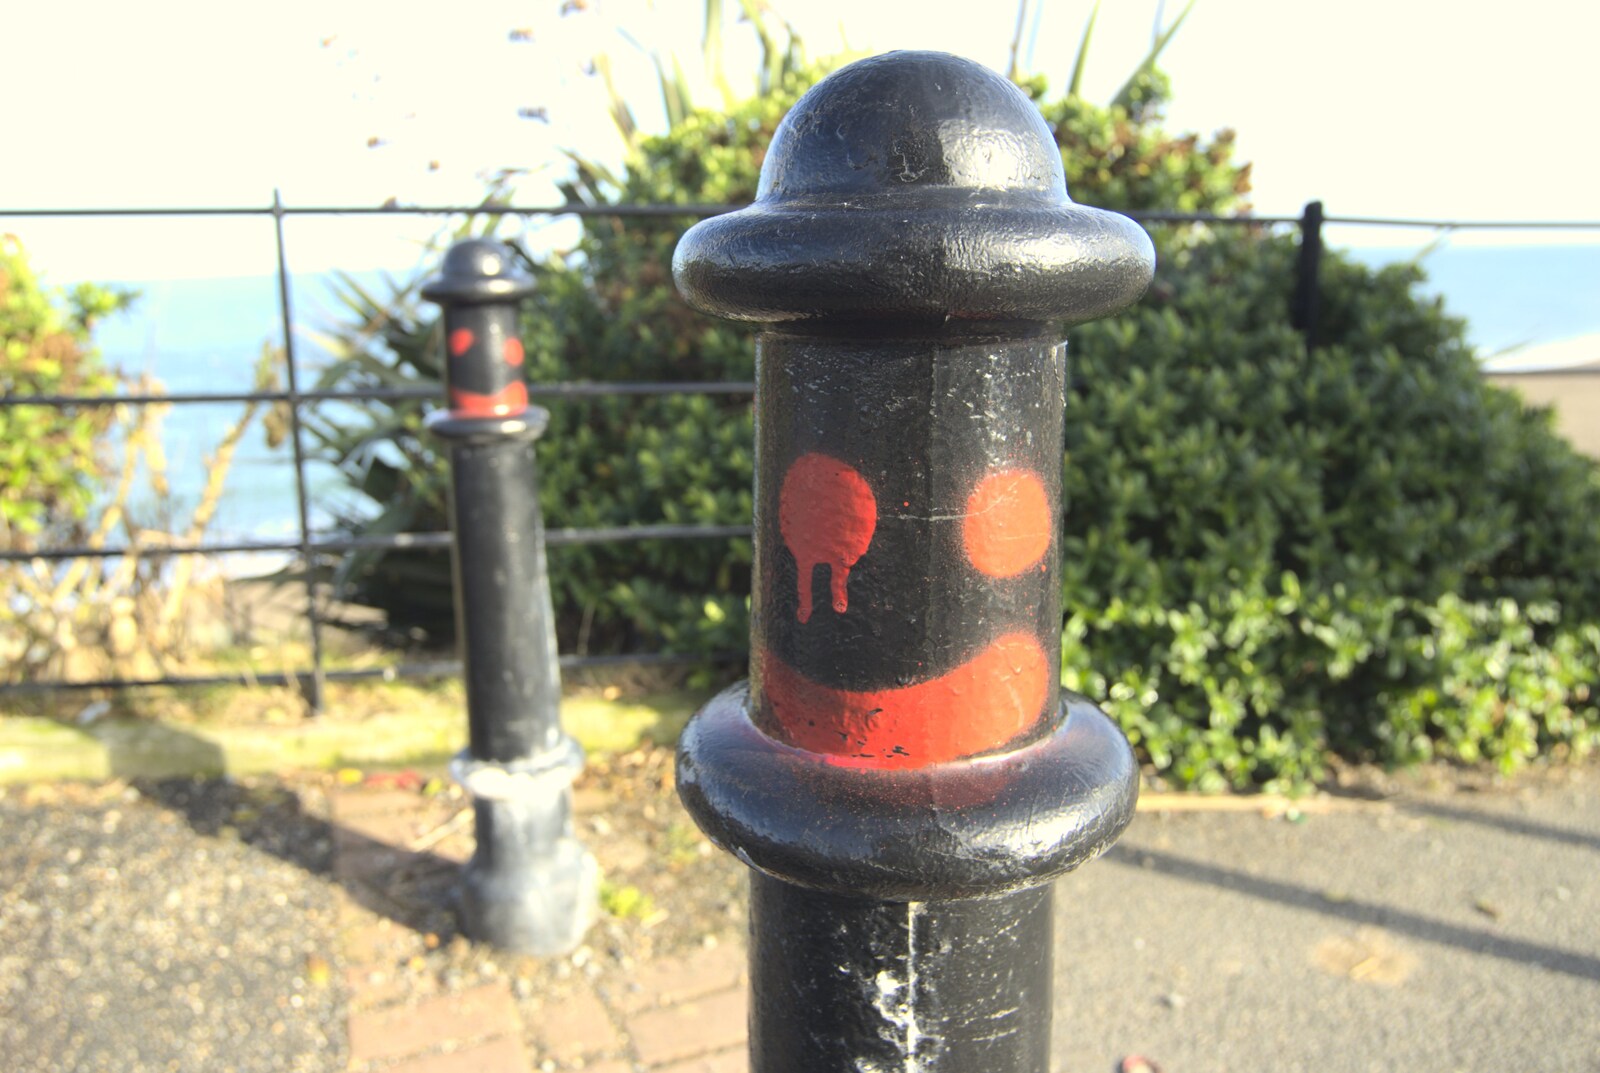 A smiley face on a pillar from A Day in Greystones, County Dublin, Ireland - 28th February 2010